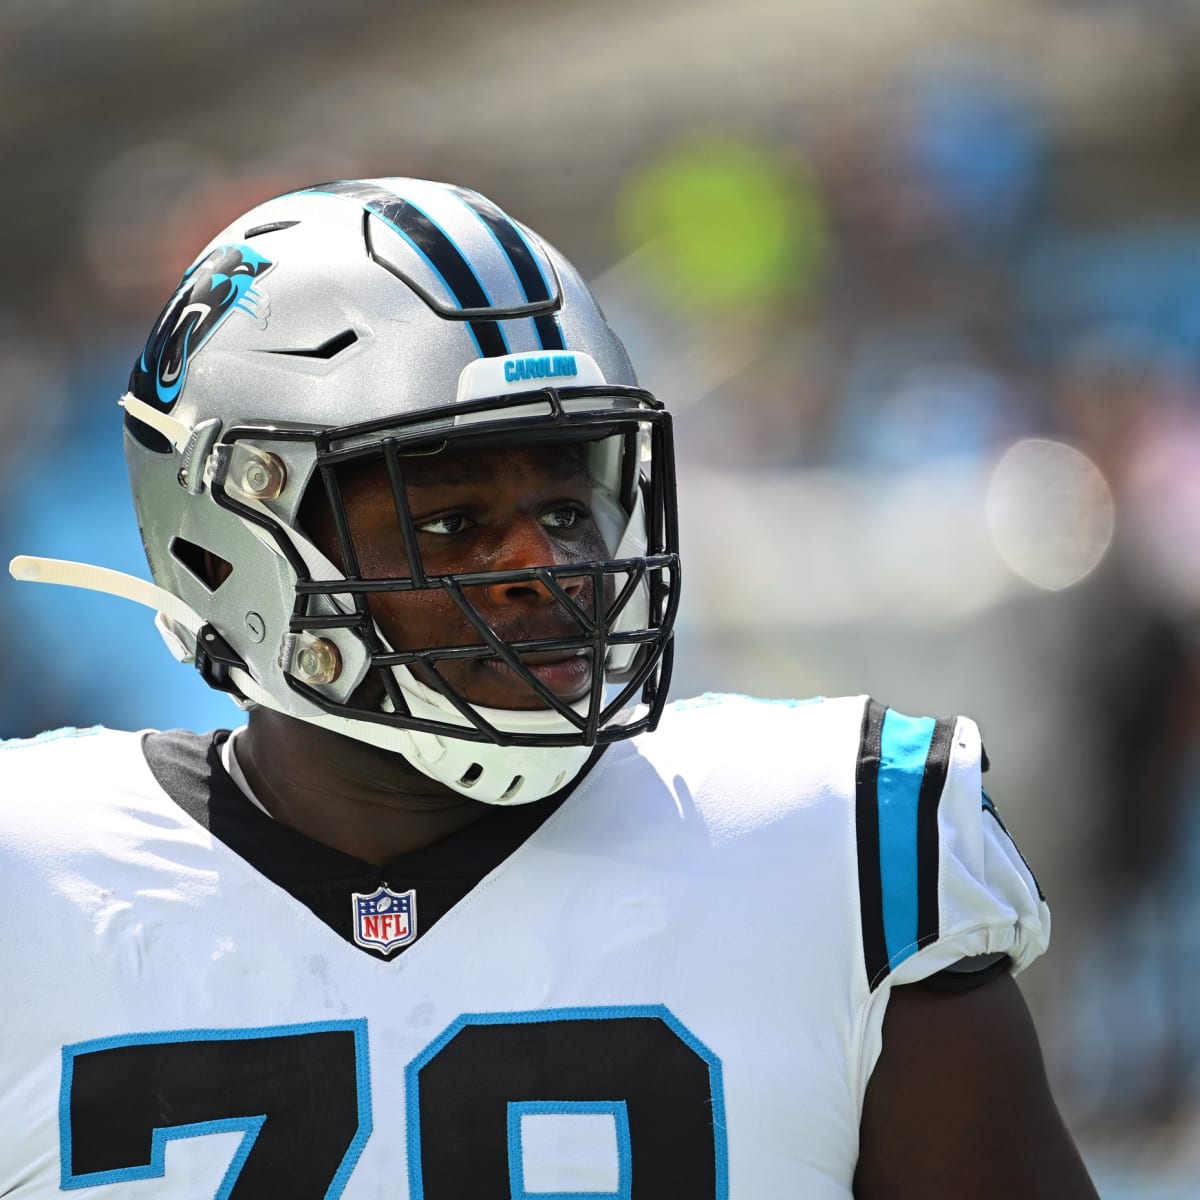 Panthers Use Their First-Round Draft Pick on Left Tackle Ickey Ekwonu